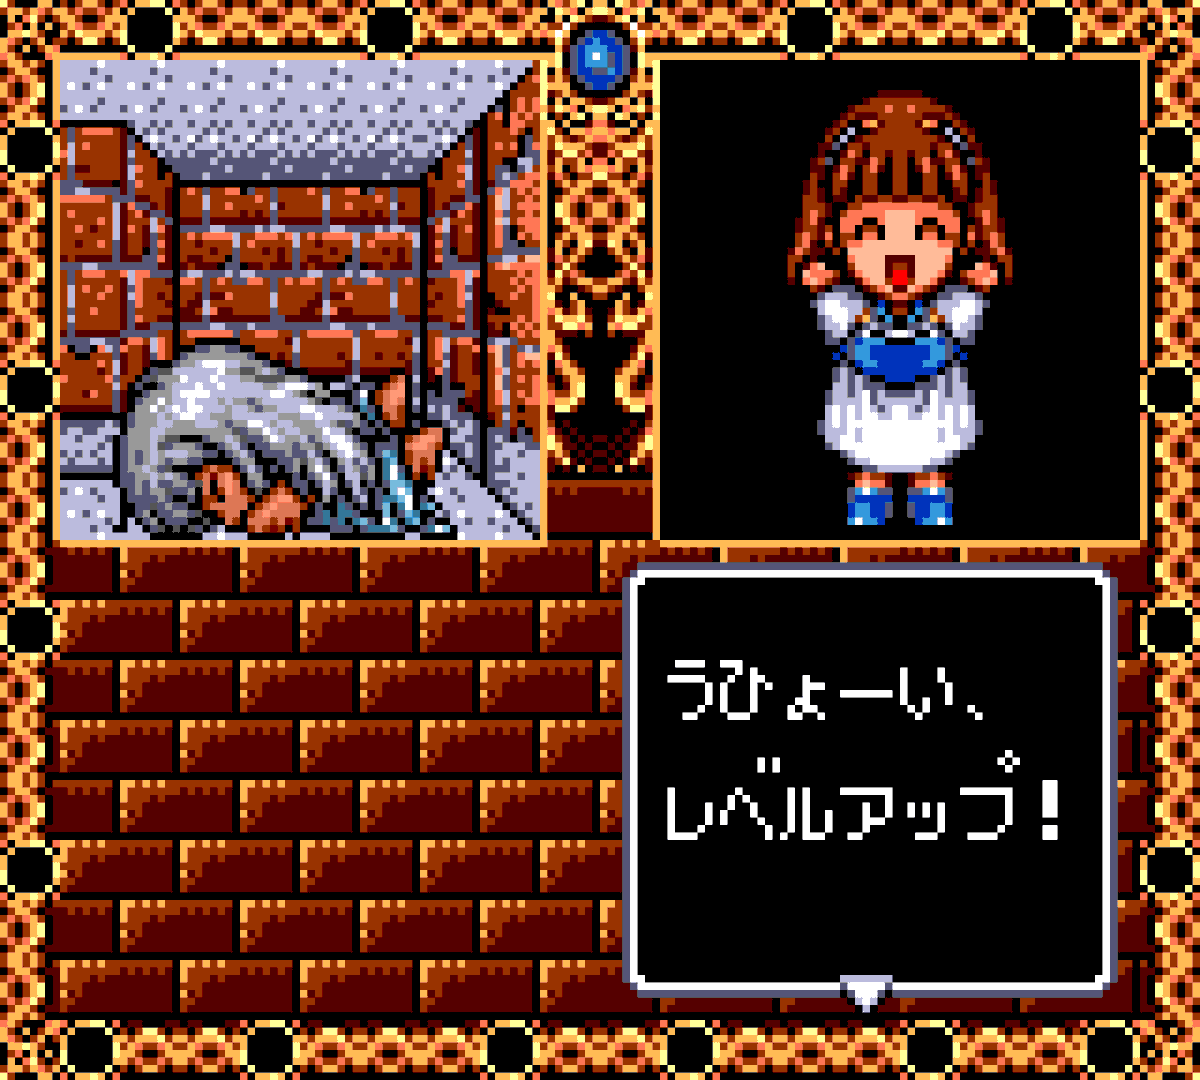 Madou Monogatari has been a surprisingly enjoyable experience so far! Nice music, interesting battle banter, and cute art :D Playing a dungeon crawler with no numbers is a neat mechanic of "just how genki are you?"Crit hit: "Super, ultra, mega damage!"